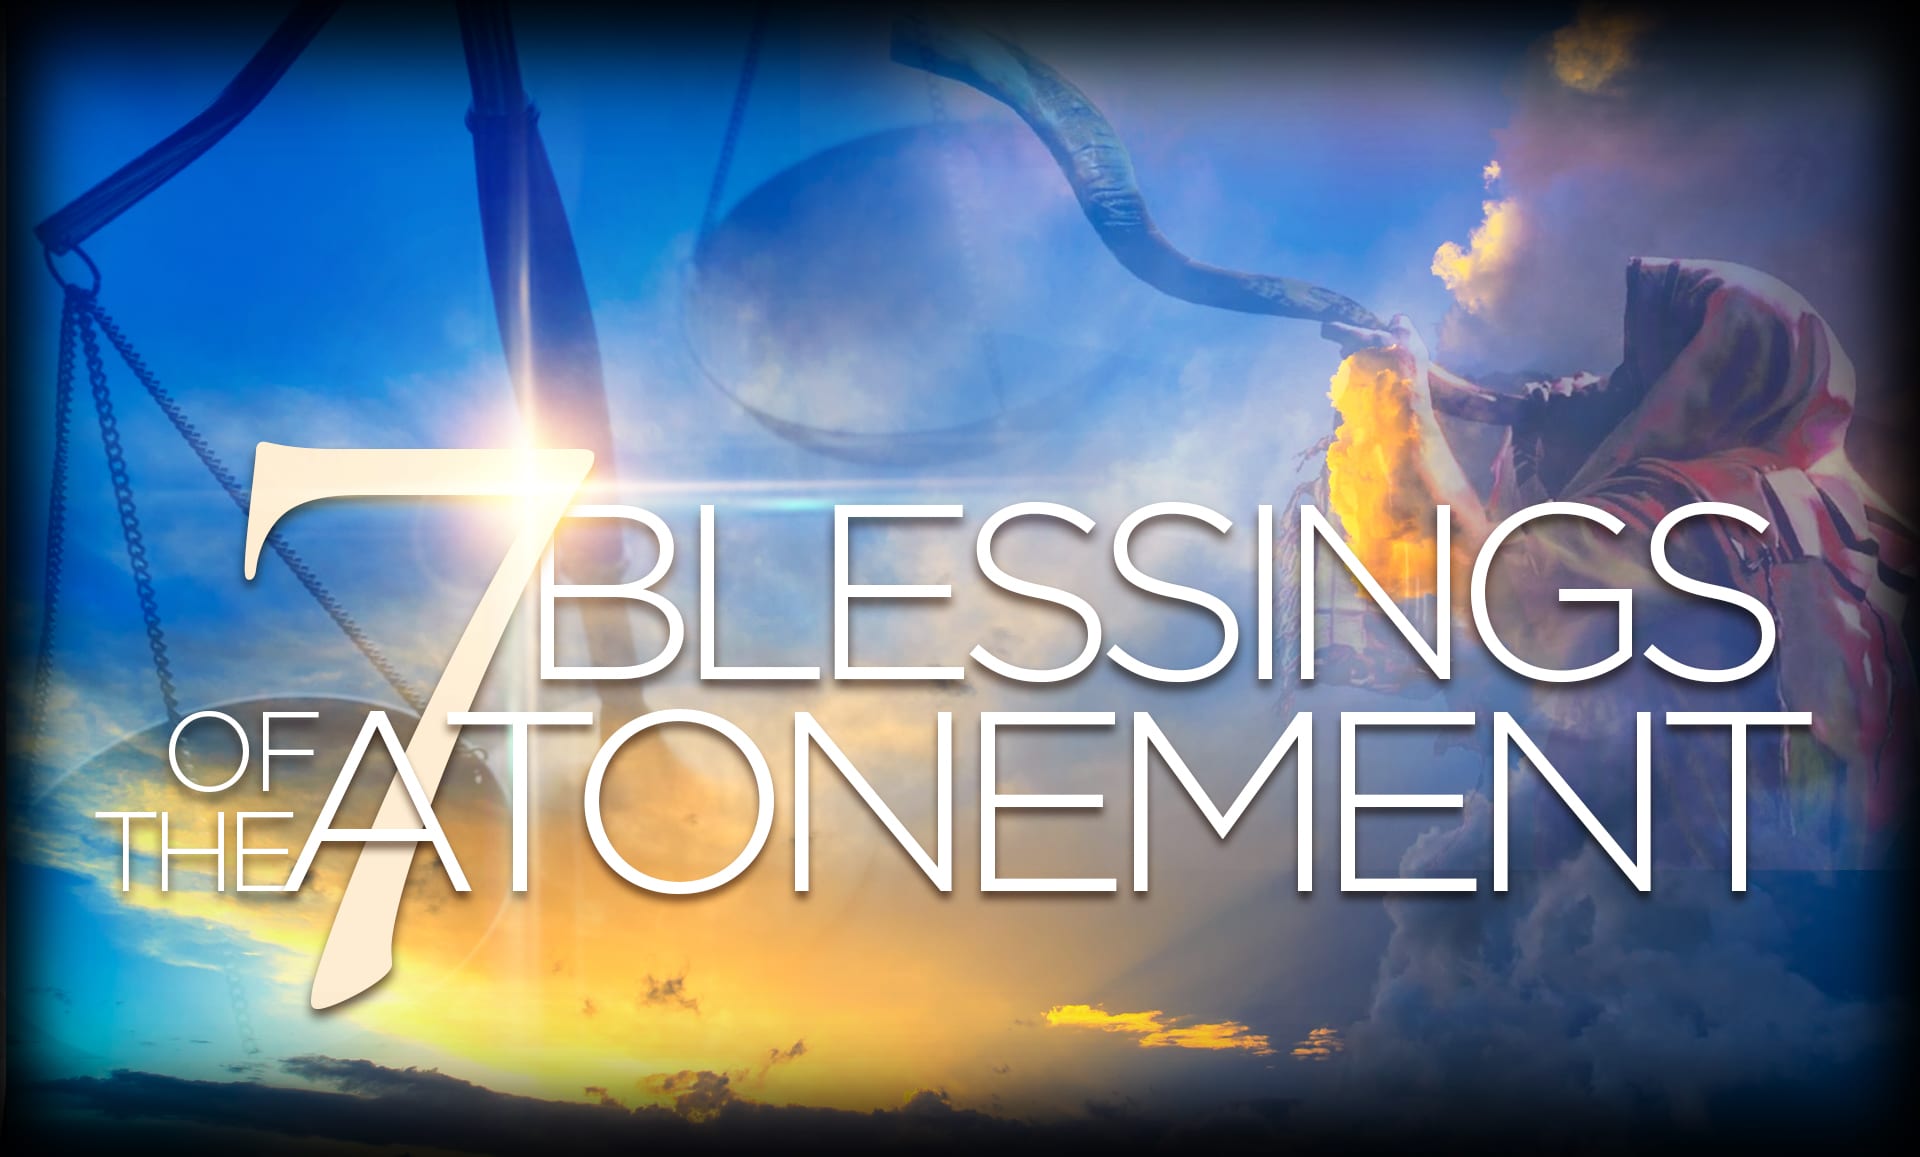 Seven Blessings of Atonement